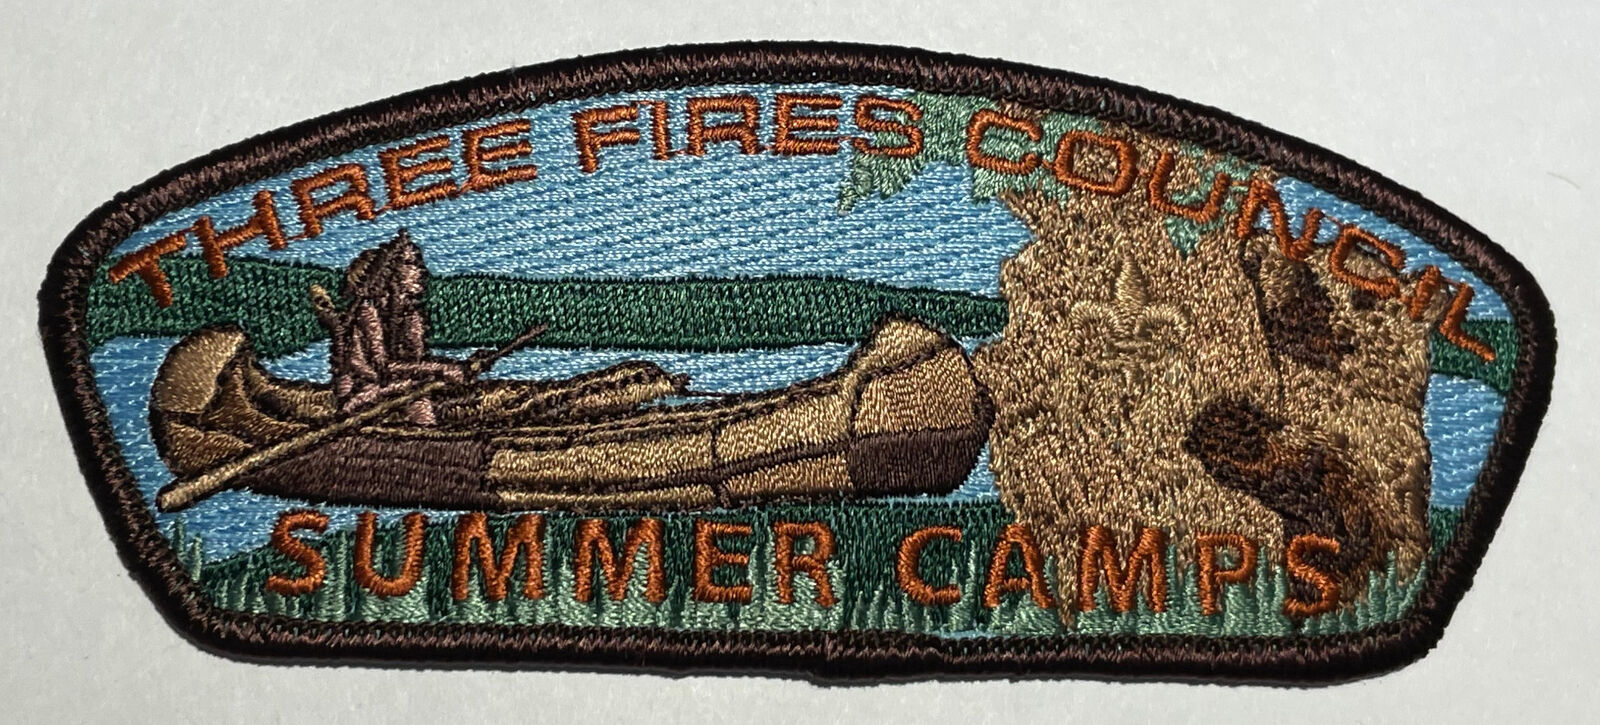 Three Fires Council Strip CSP Summers Camps Boy Scout XJ1